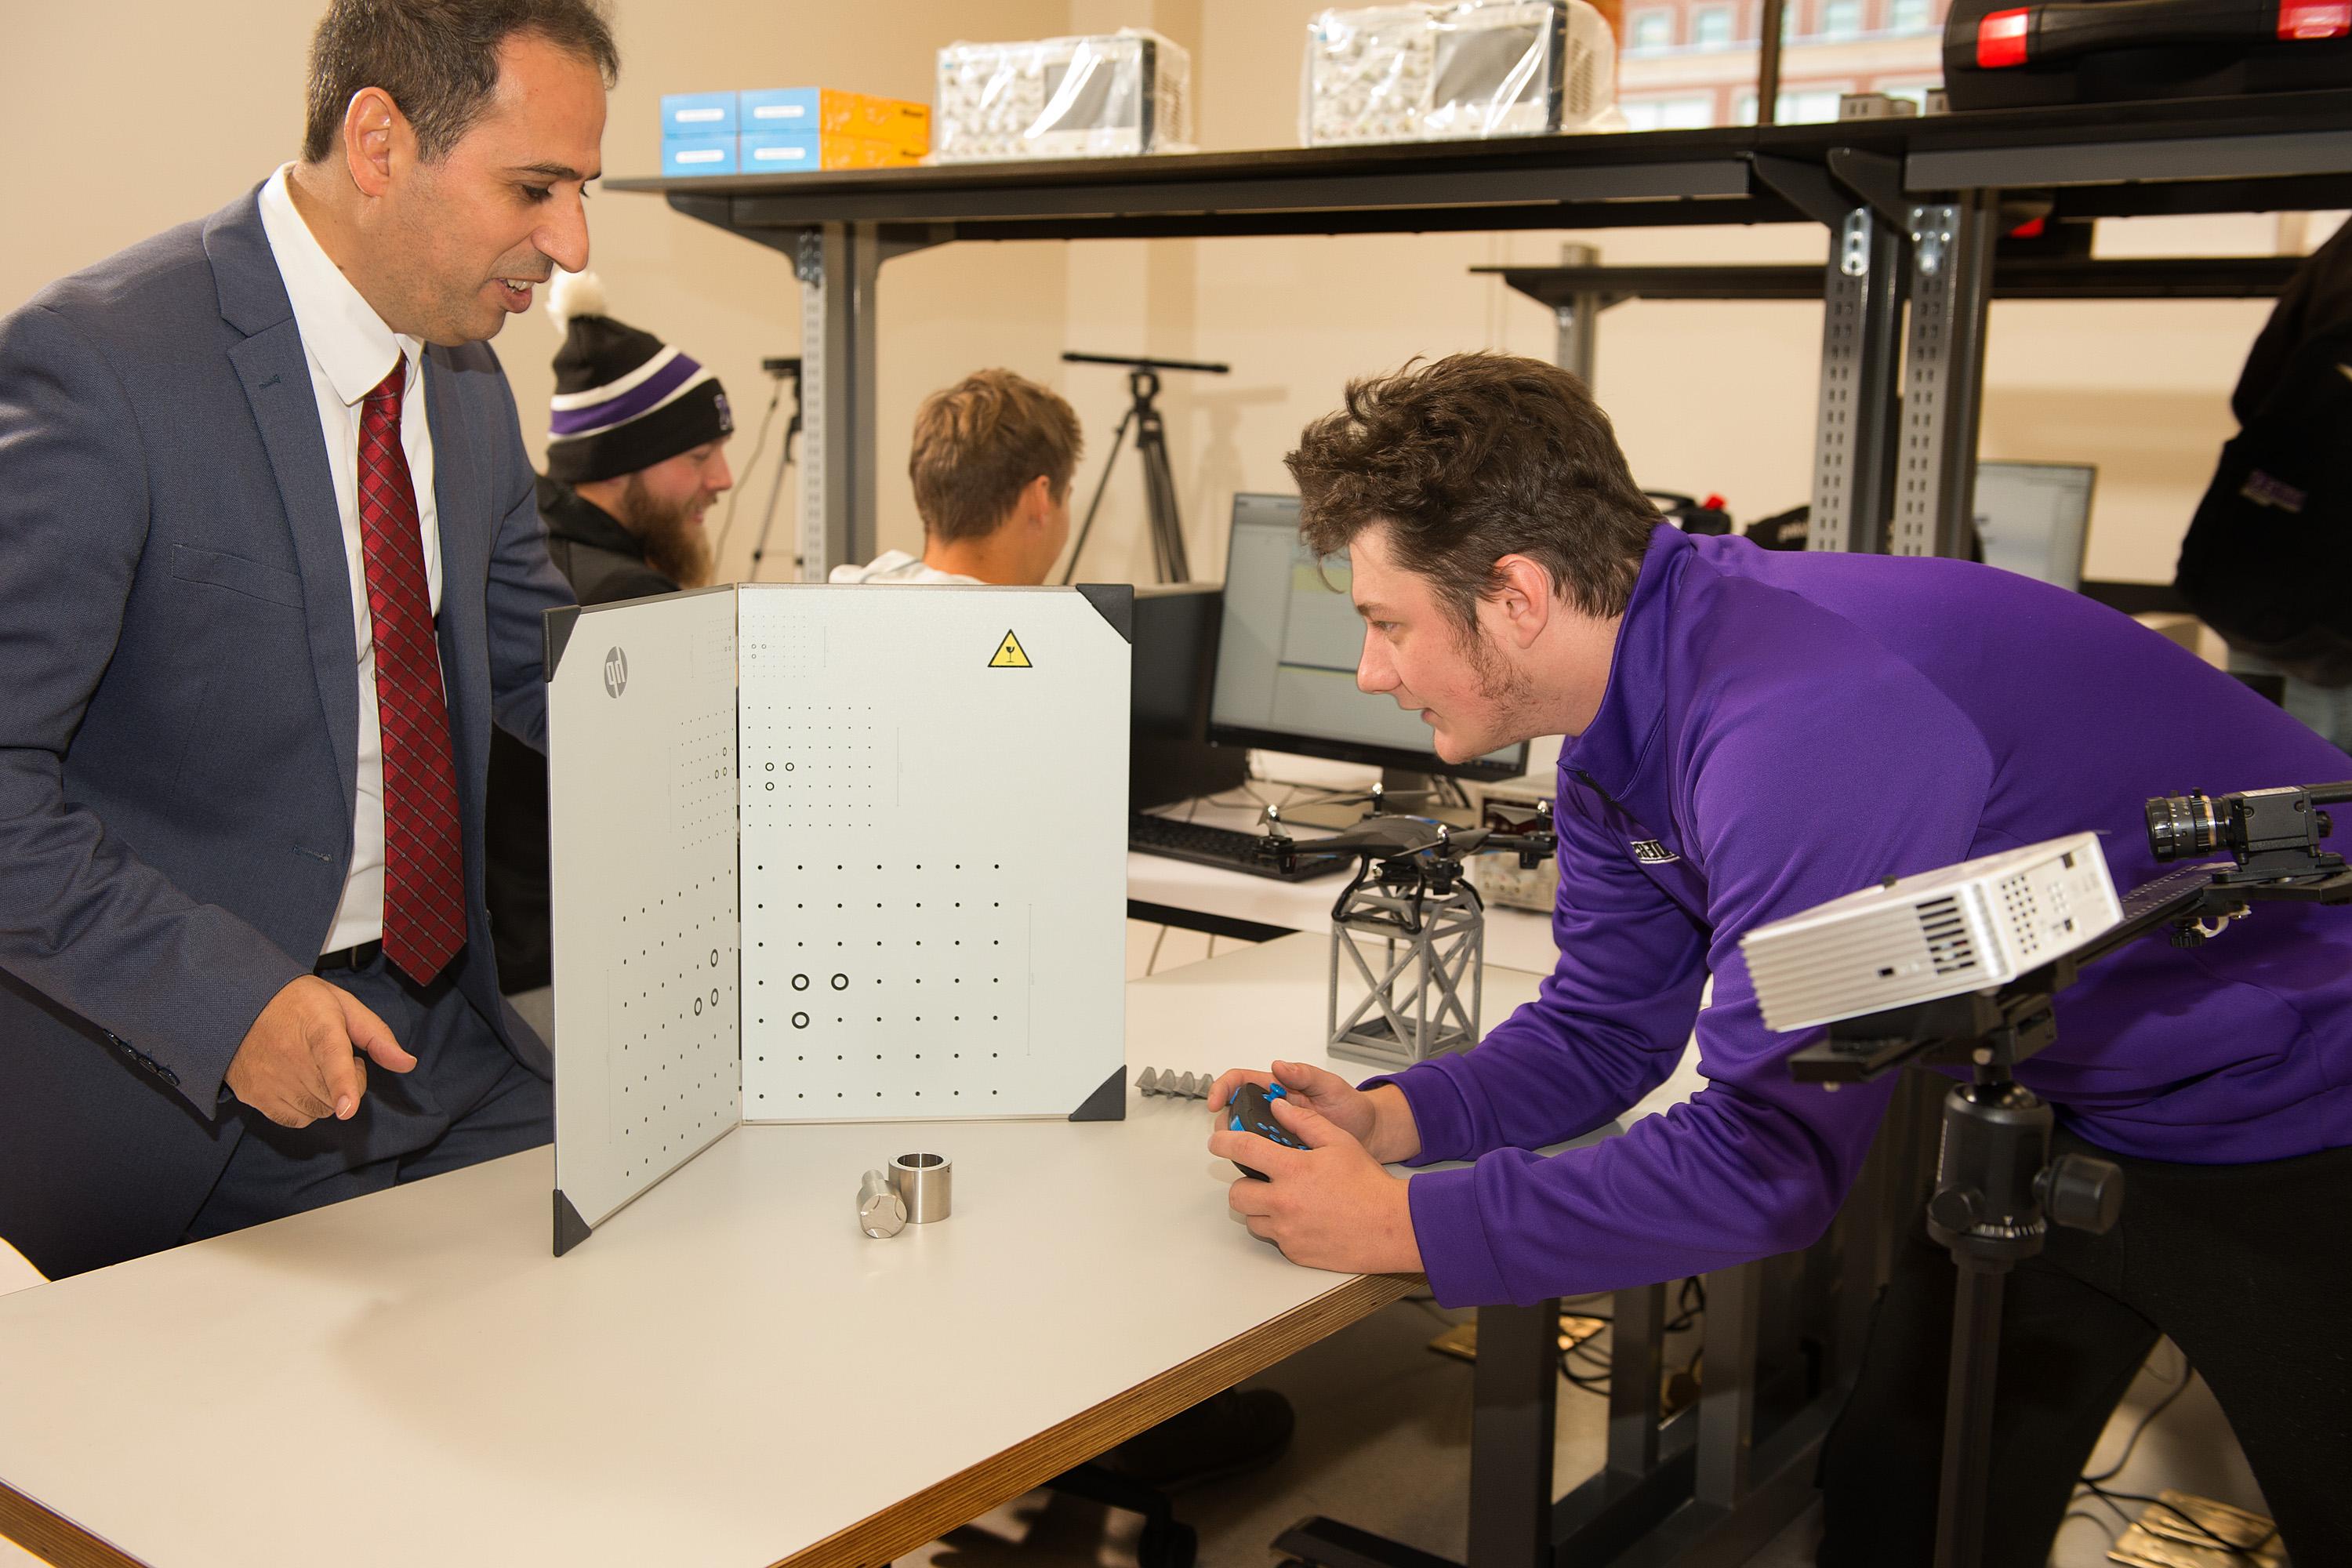 Mount Union biology faculty member in the lab with students